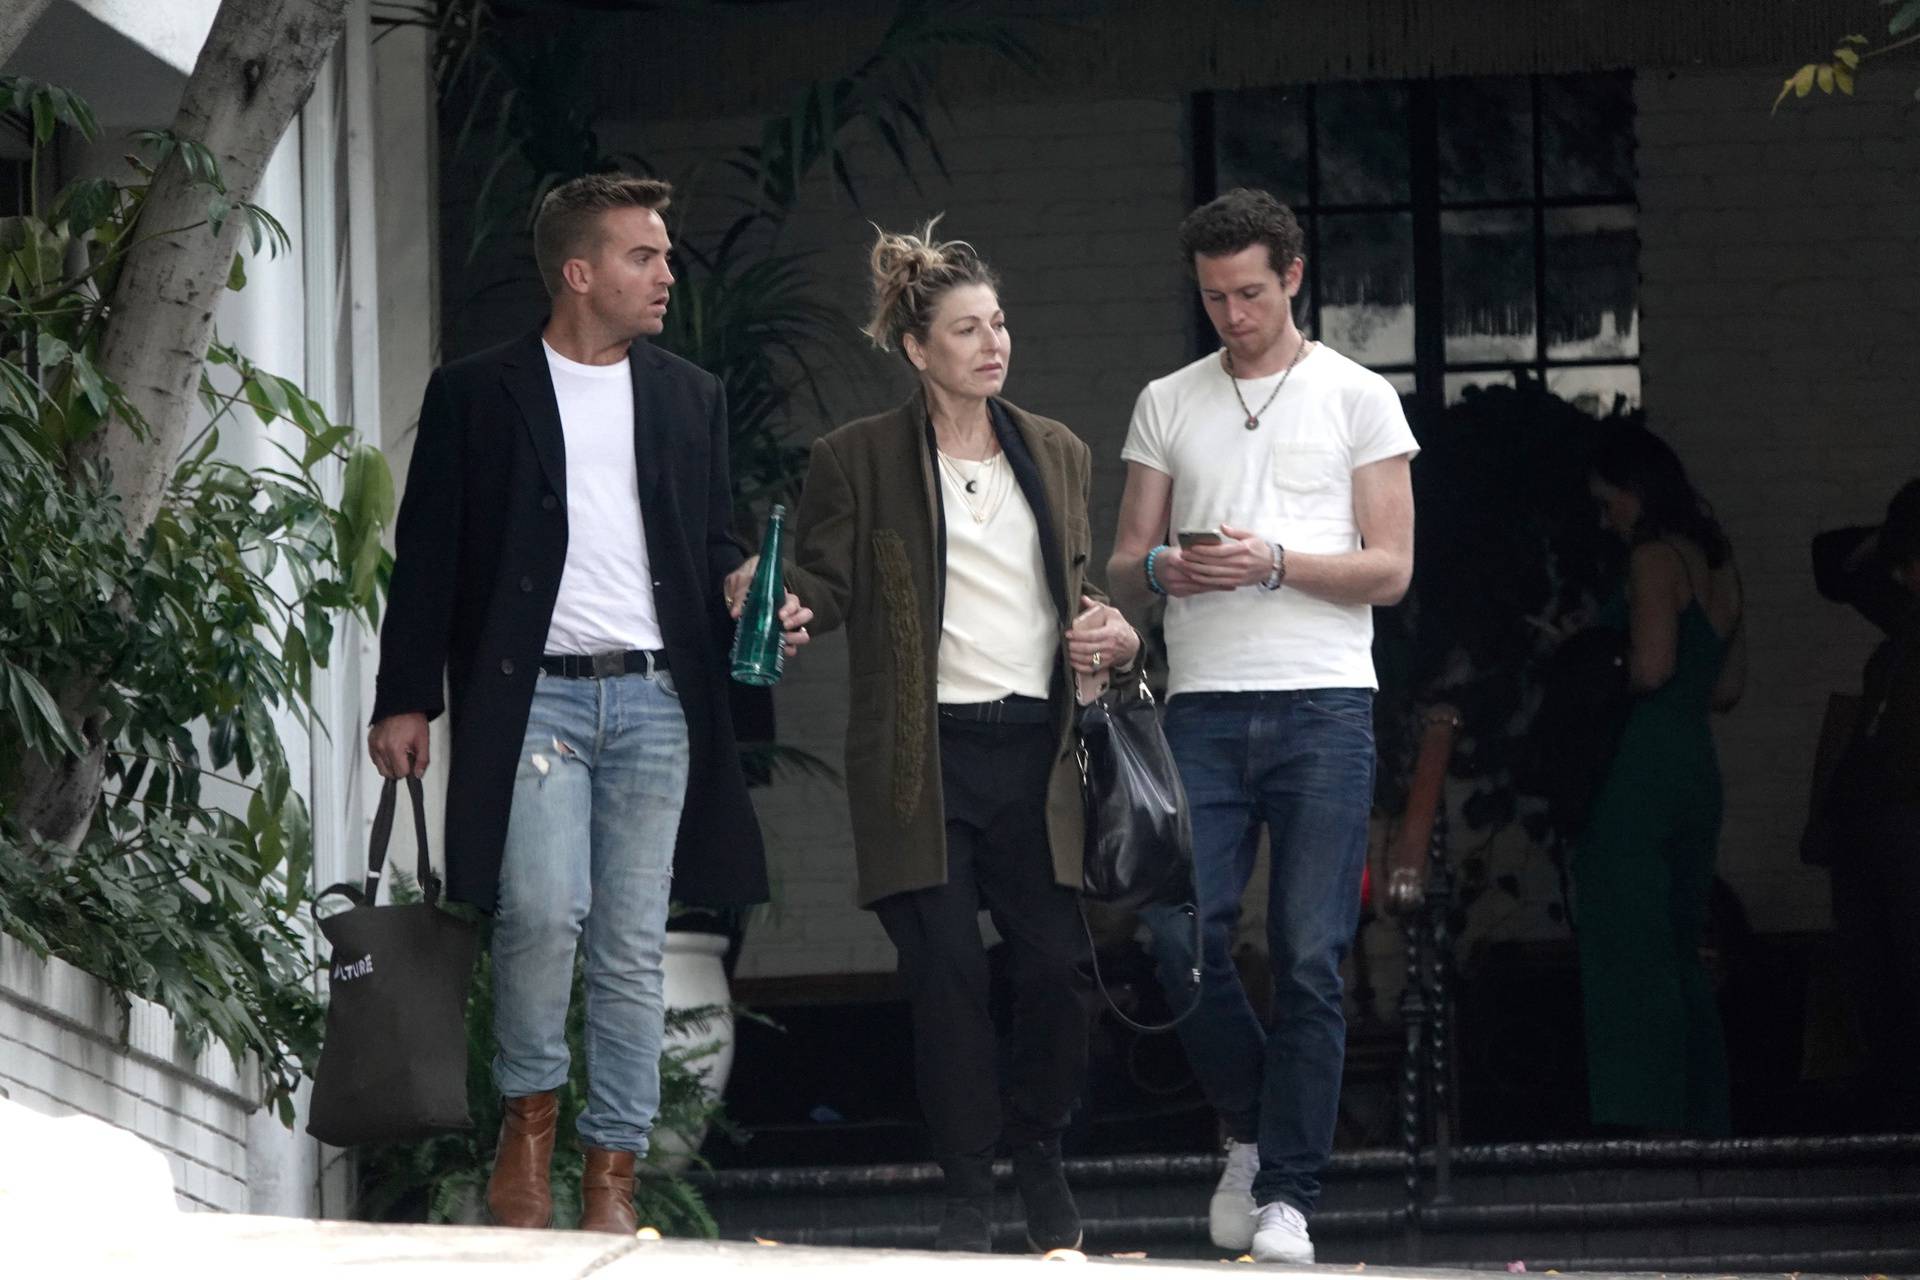 EXCLUSIVE: Tatum O'Neal and her son Sean O'Neal seen leaving lunch at Chateau Marmont and posing for photos with Australian songwriter James Maas